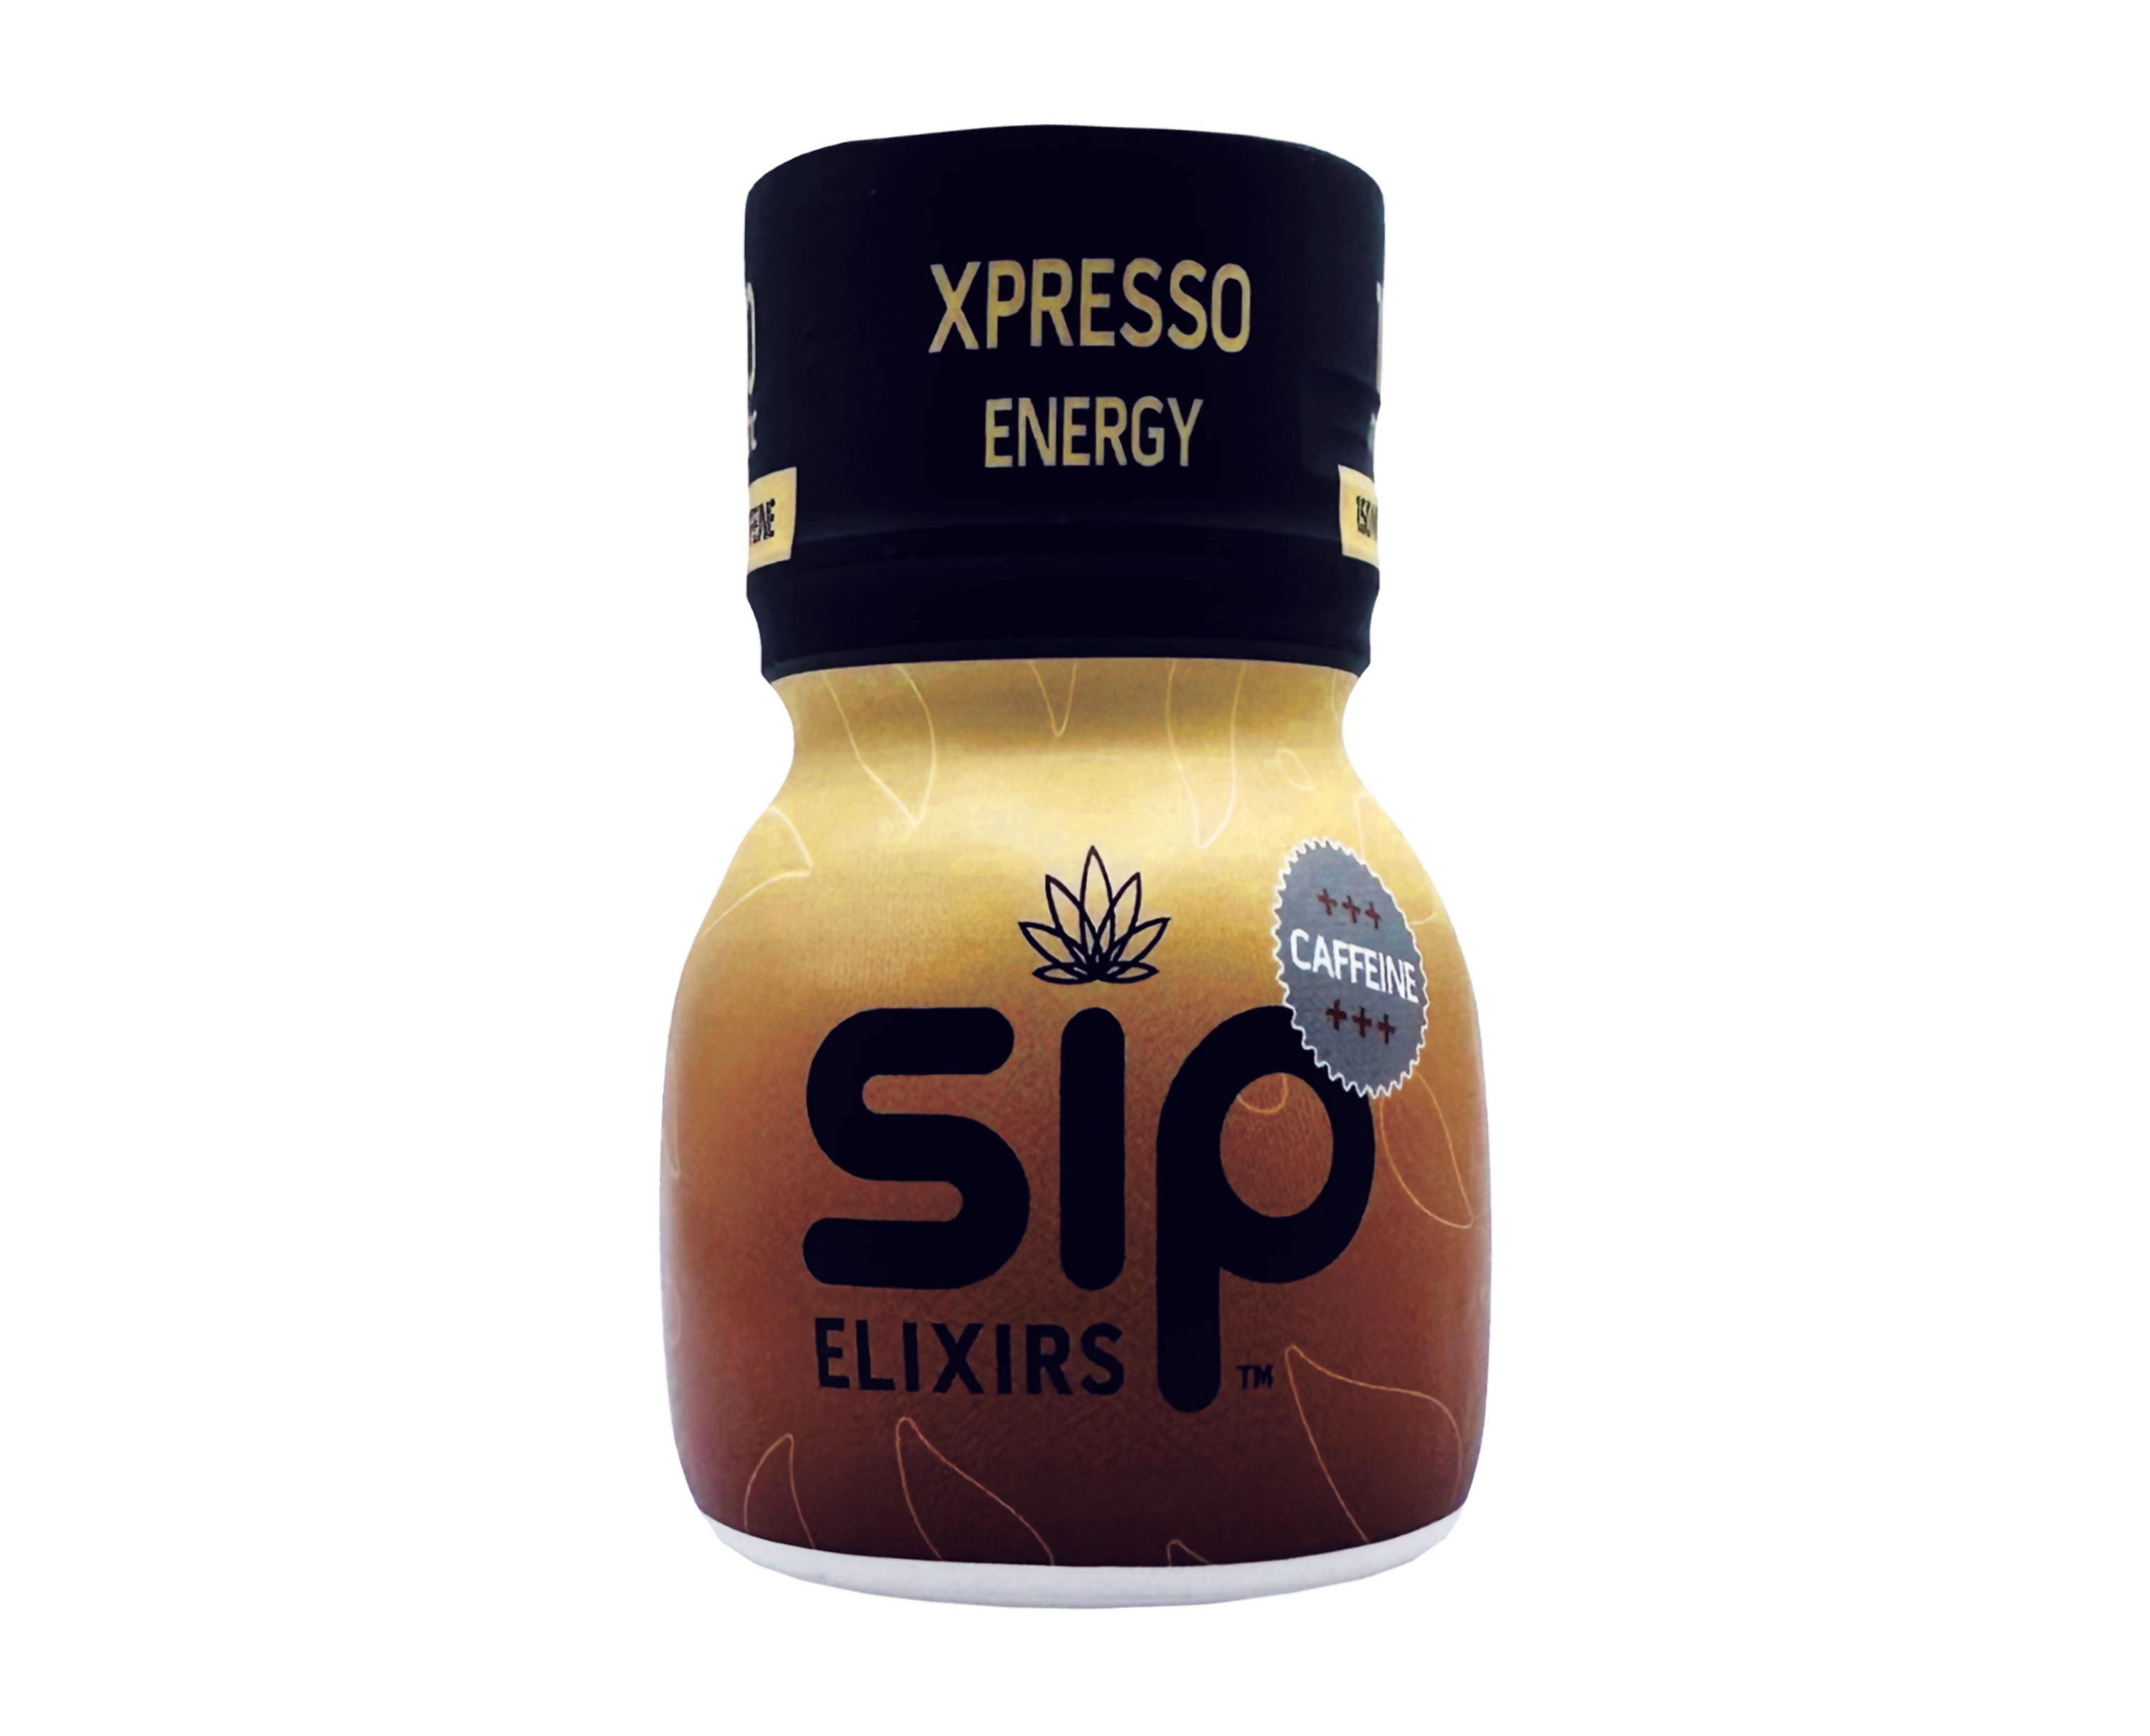 Tropical Crush Flavored Elixir from Sip Elixirs